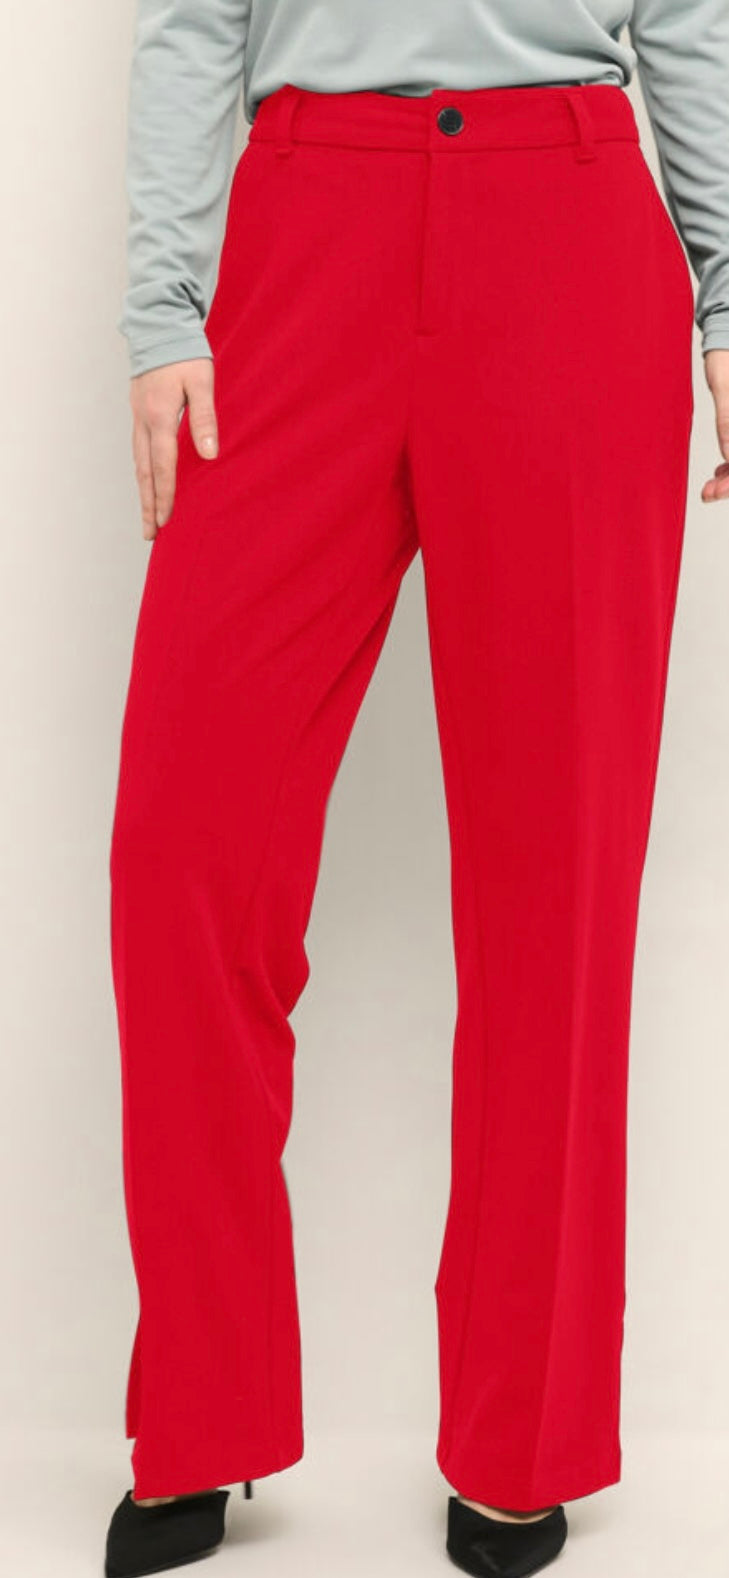 Cucenette pants Chinese Red